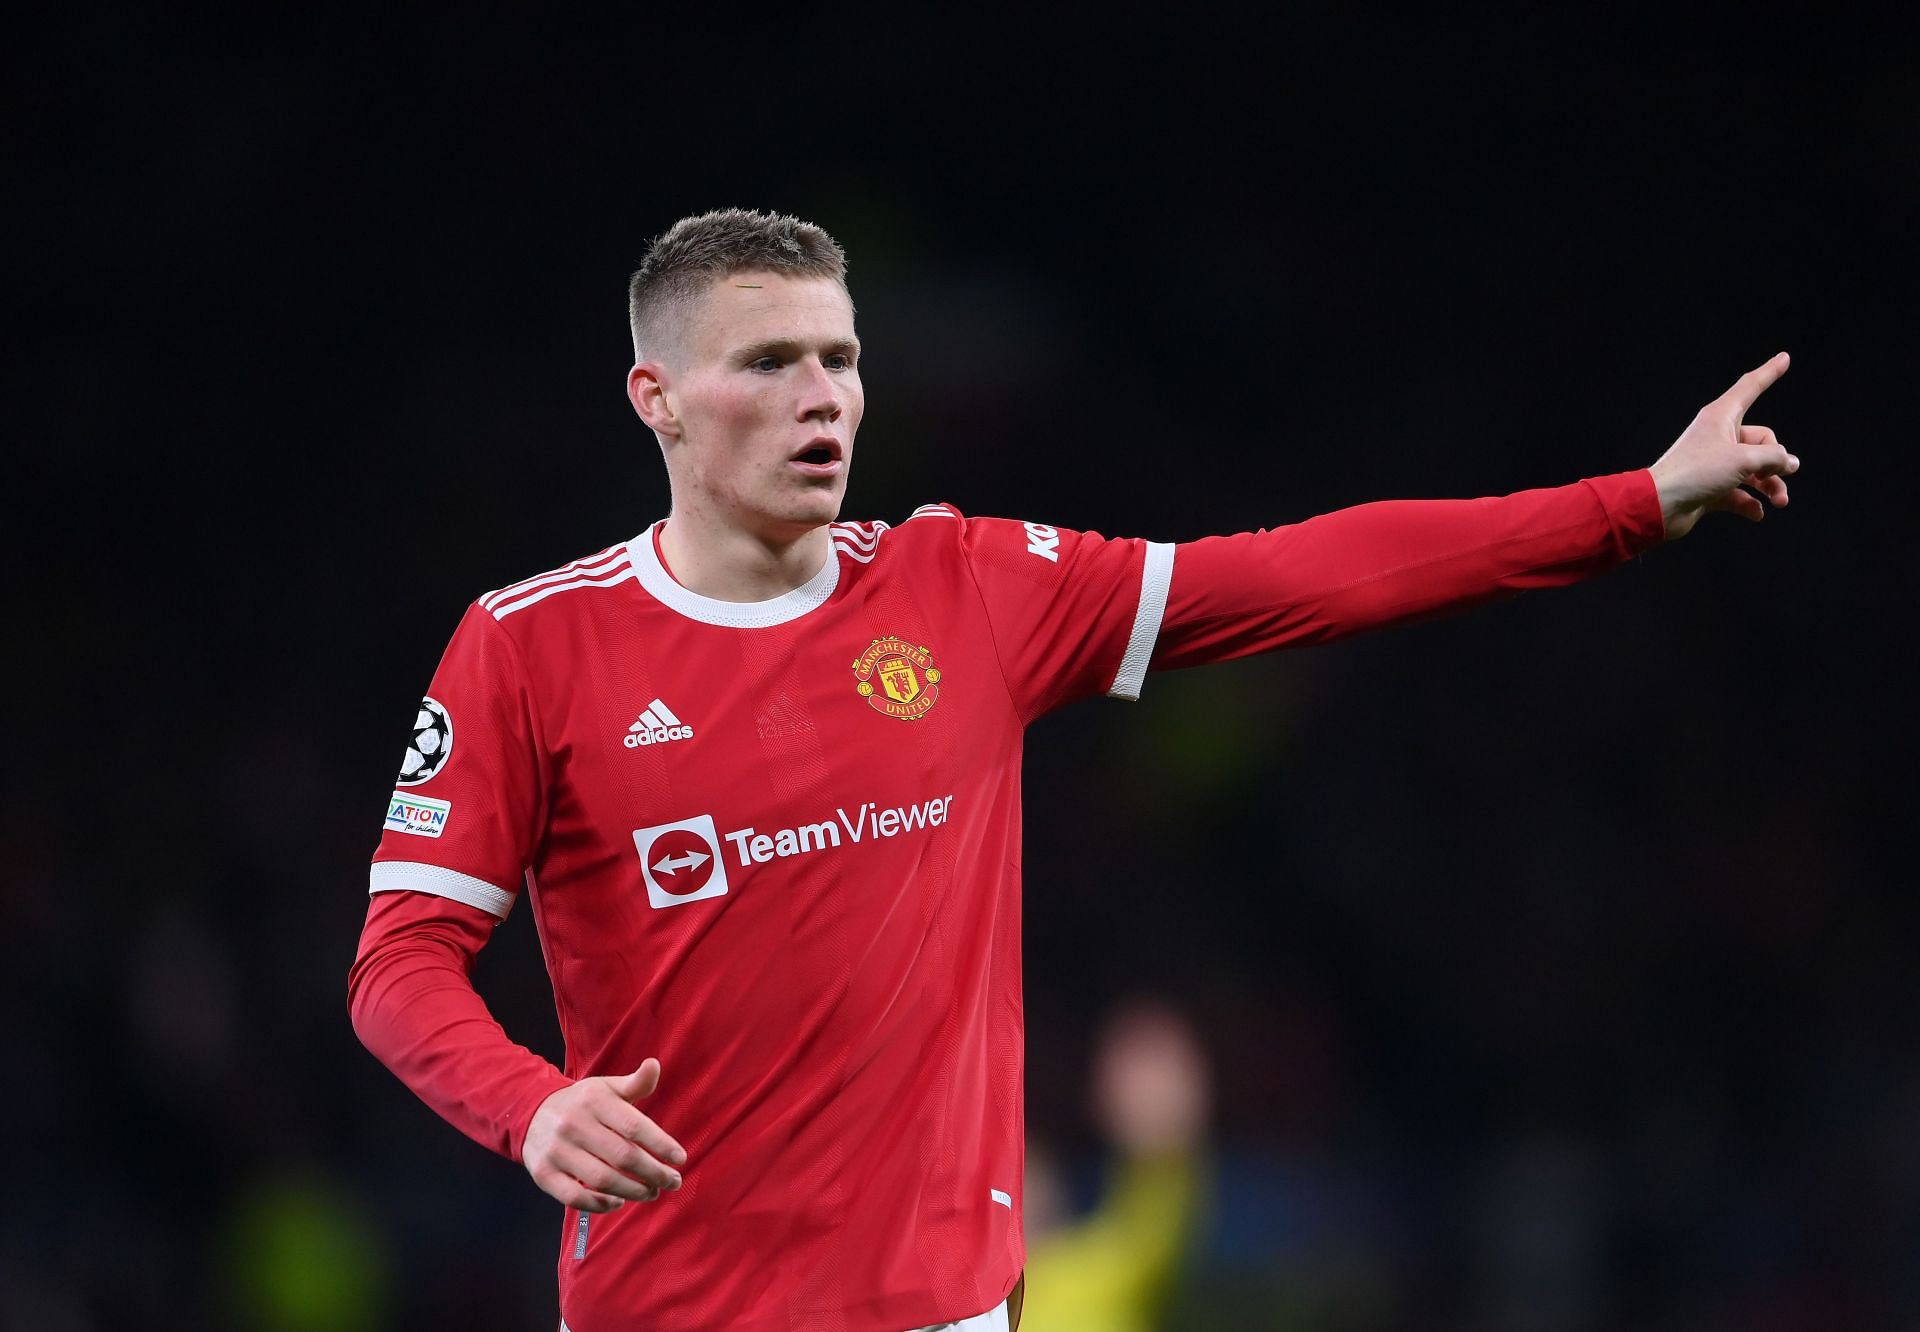 Scott McTominay in a game against Villarreal CF in the UEFA Champions League